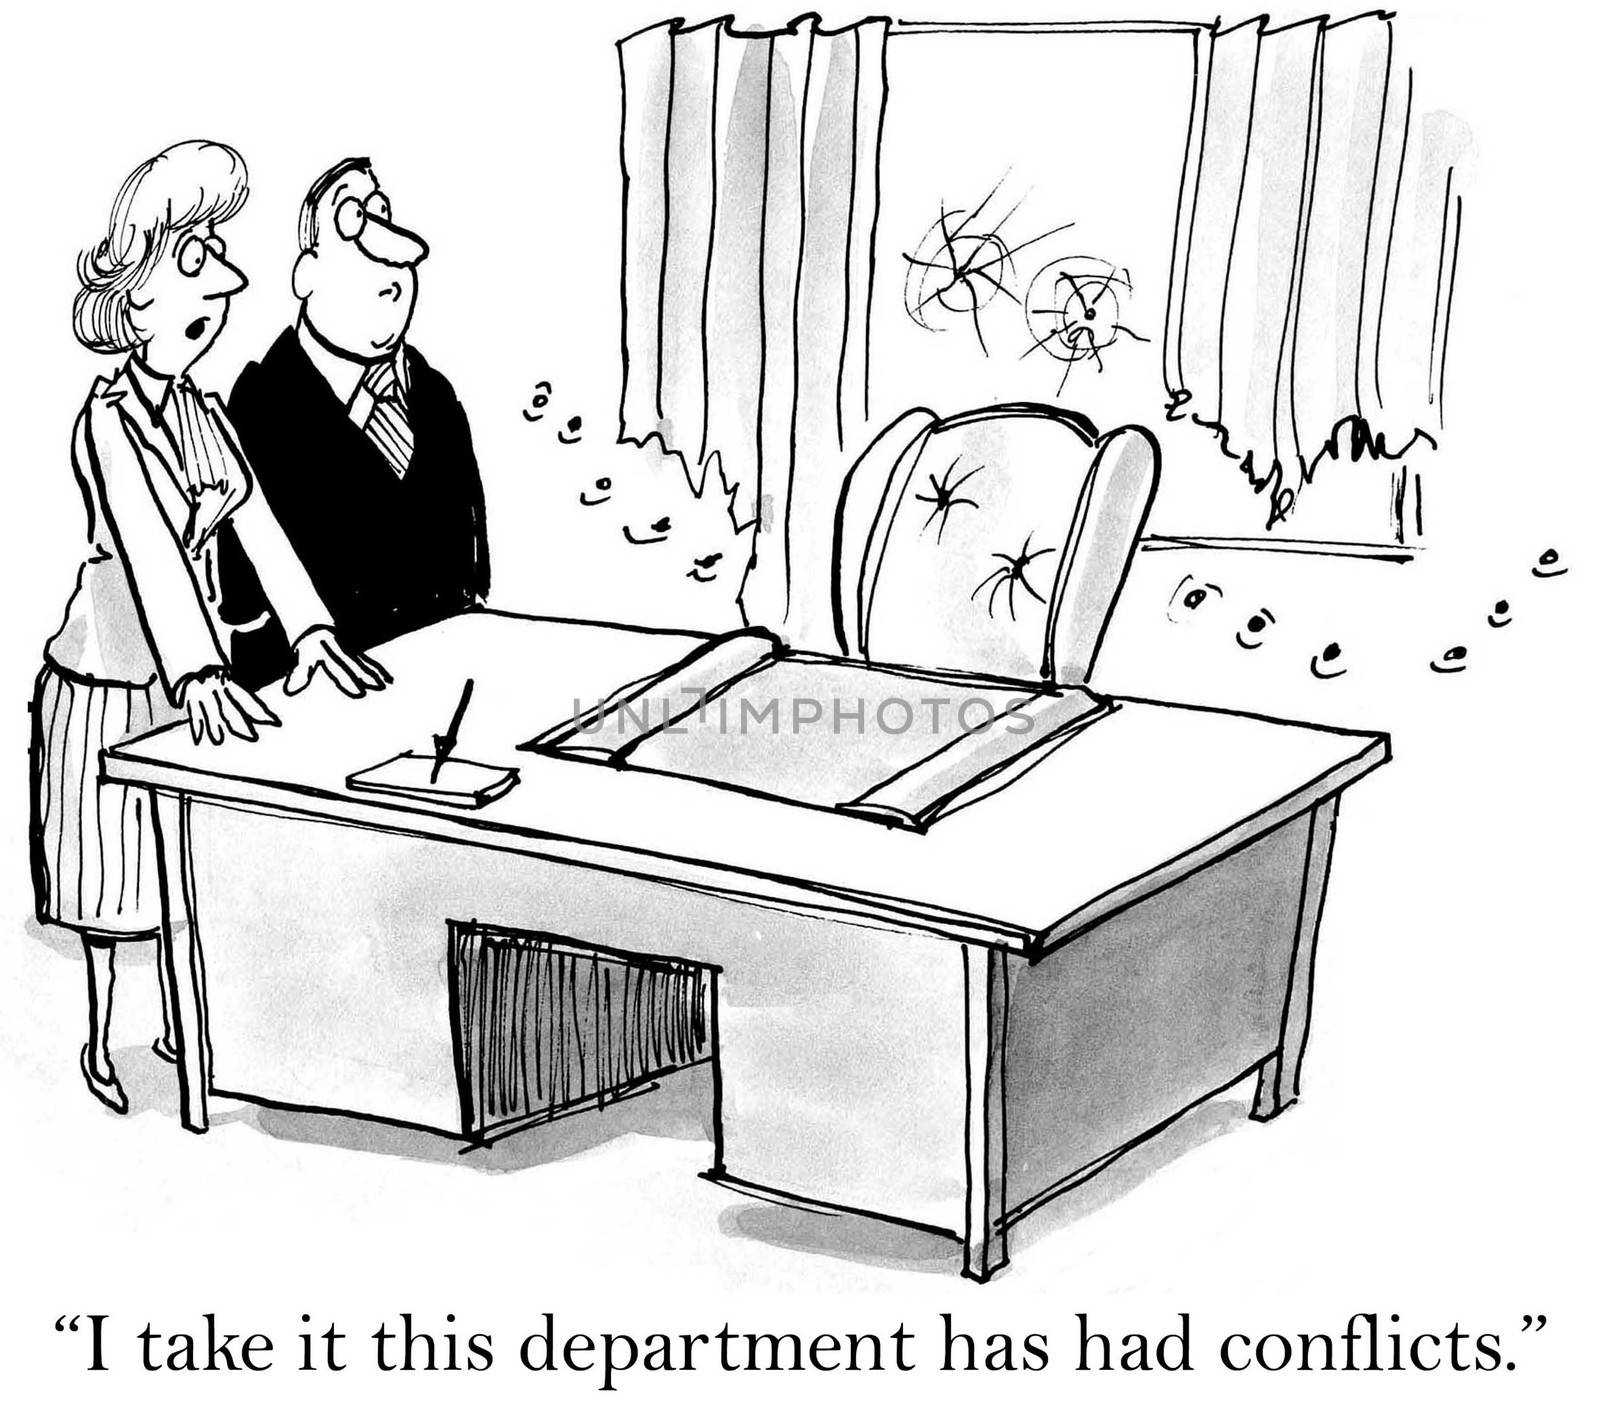 "I take it this department has had conflicts."